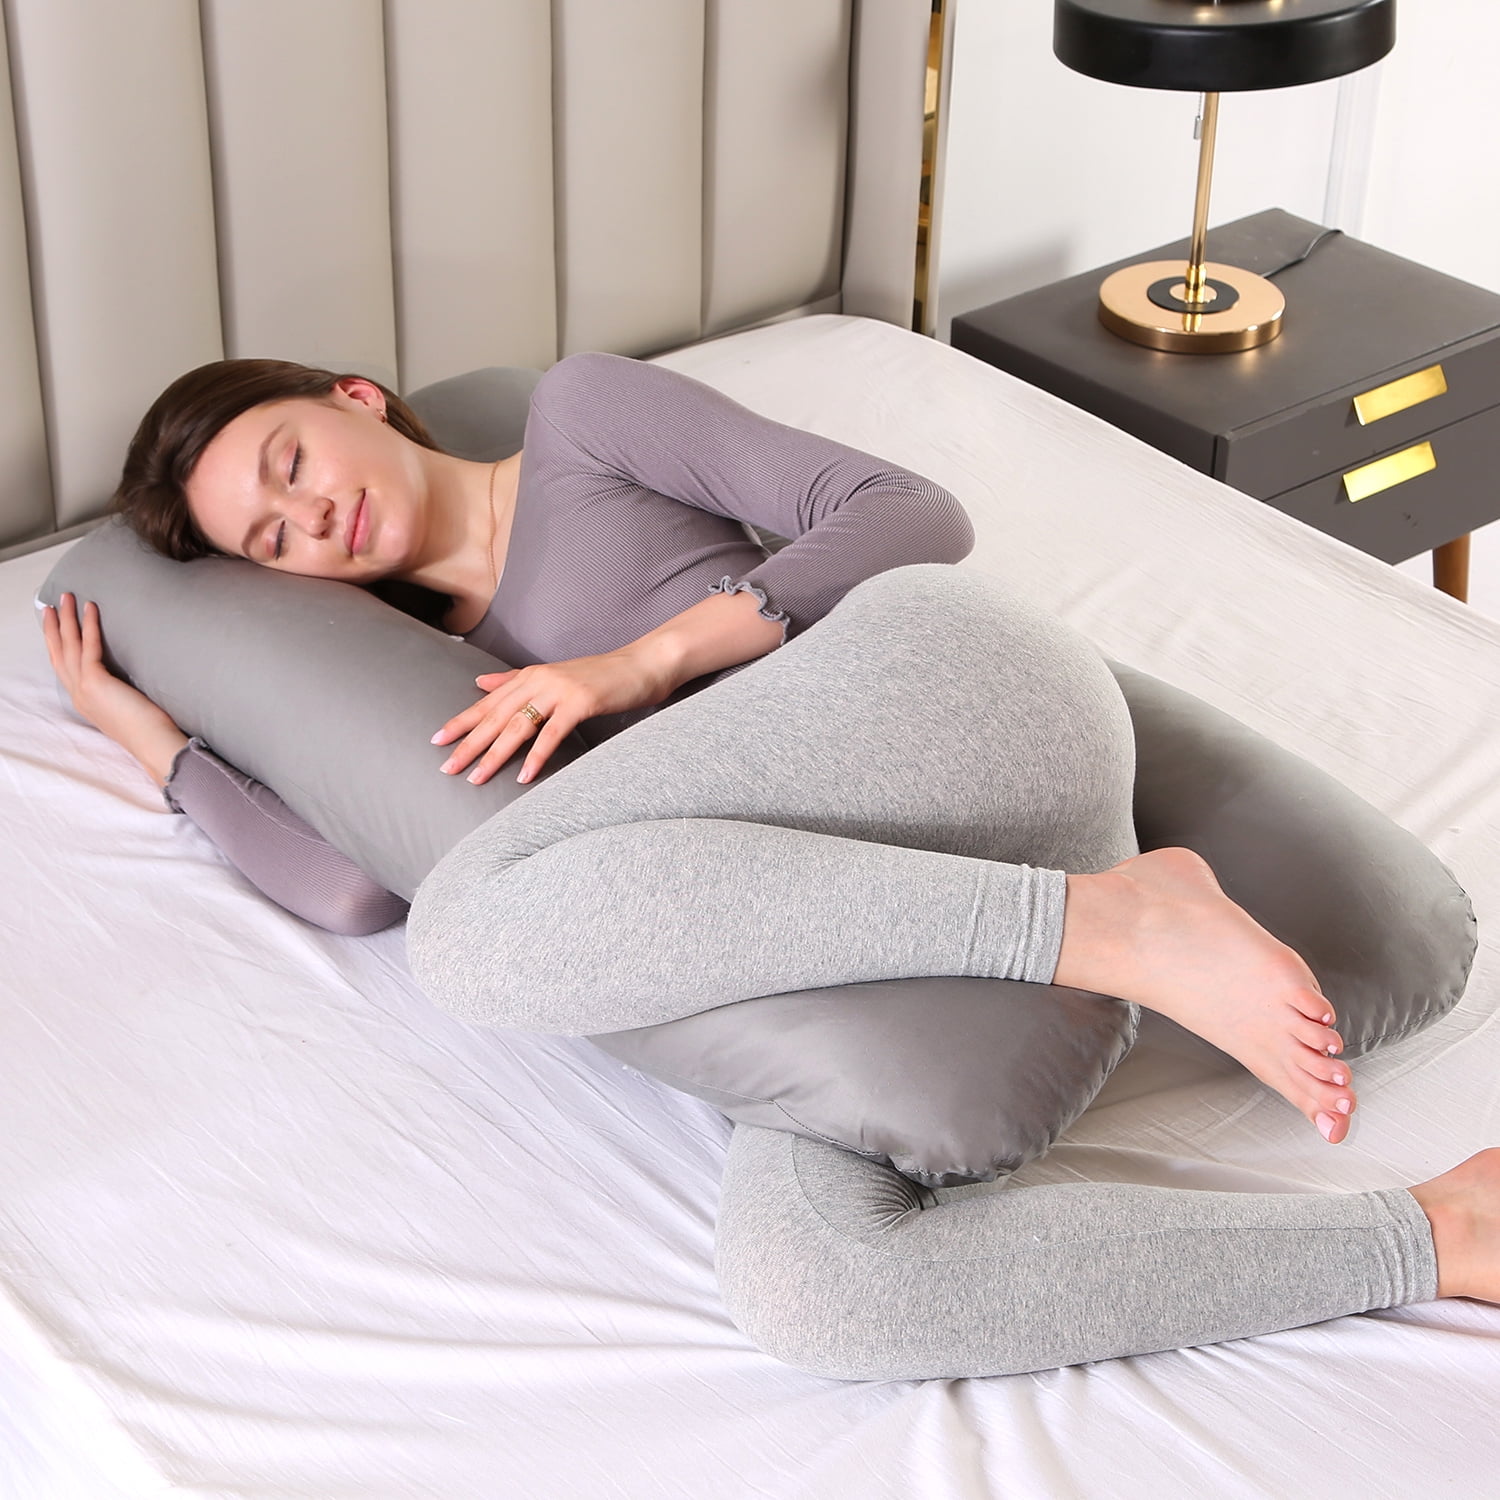 U-Shape Pregnancy Pillow 51 Inch Maternity Pillow with Washable Cover  Nursing Support Cushion for Pregnant Women Side Sleeping (Gray Stripe) 